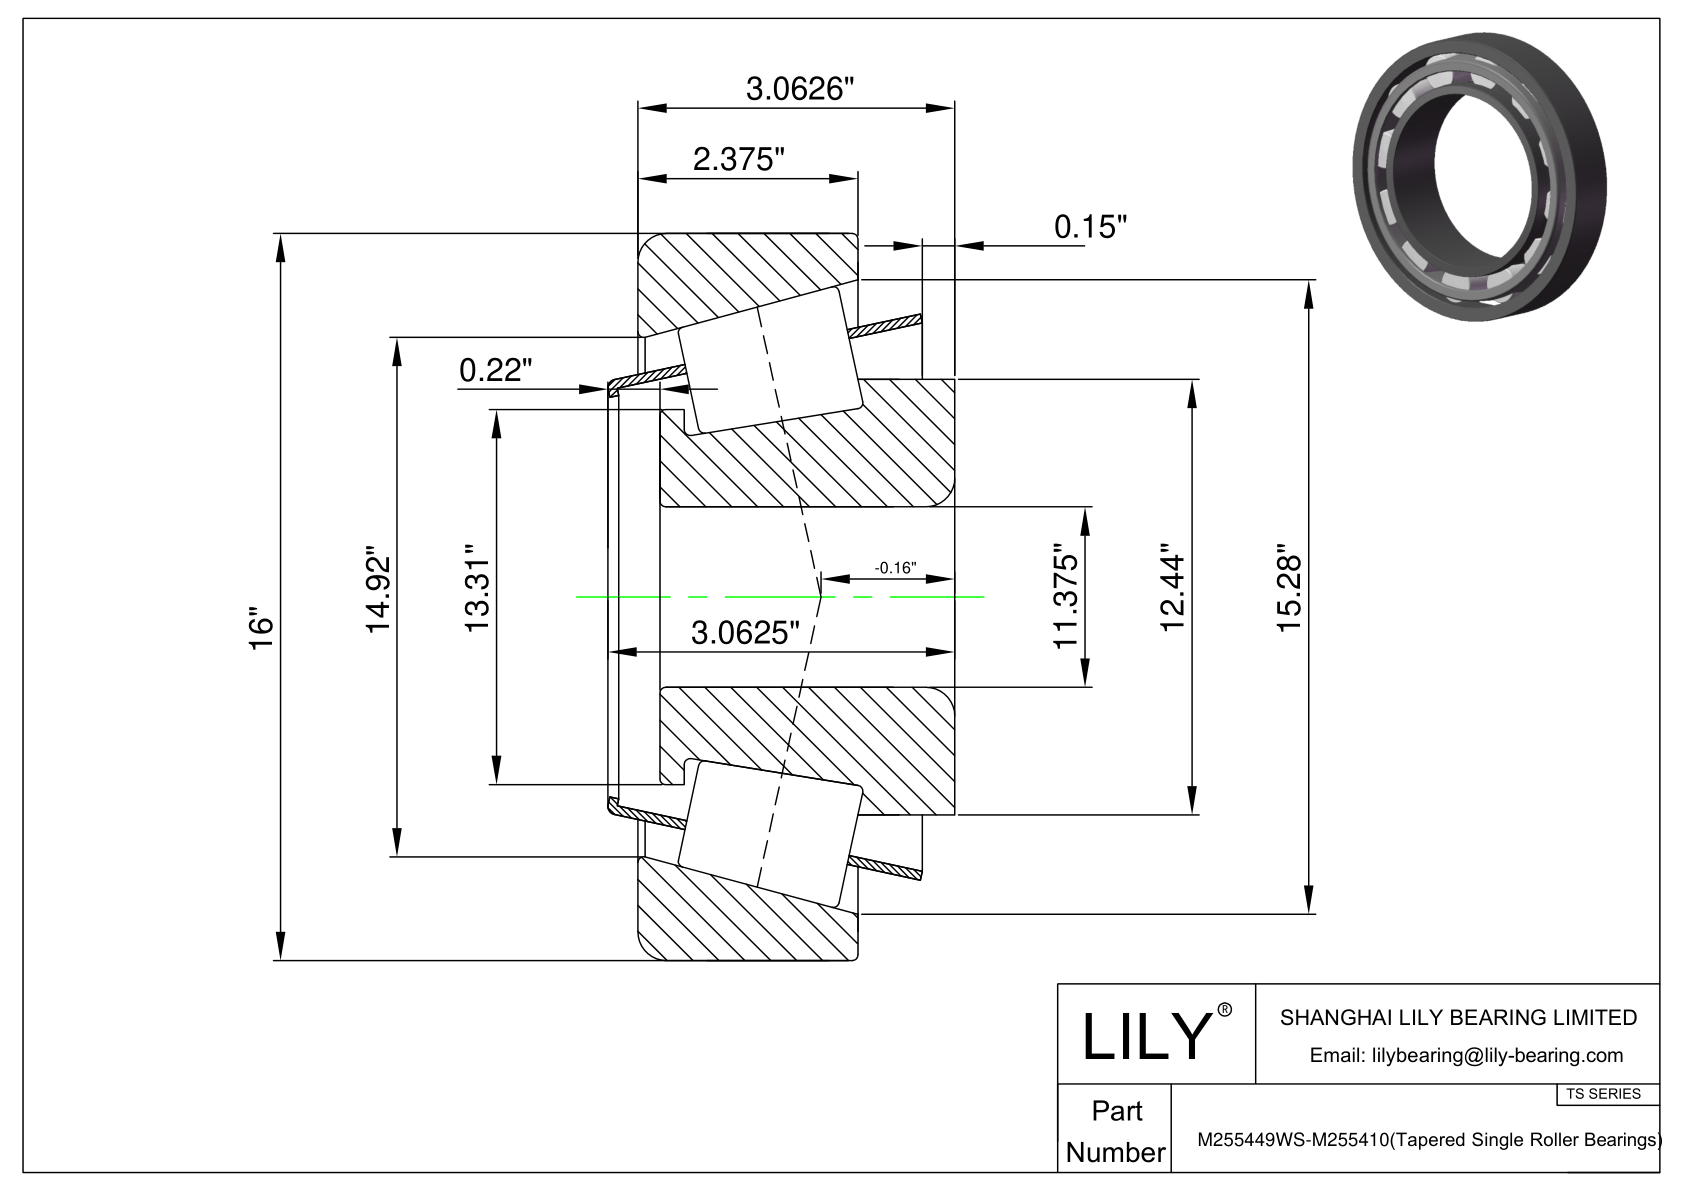 M255449WS-M255410 TS (Tapered Single Roller Bearings) (Imperial) cad drawing